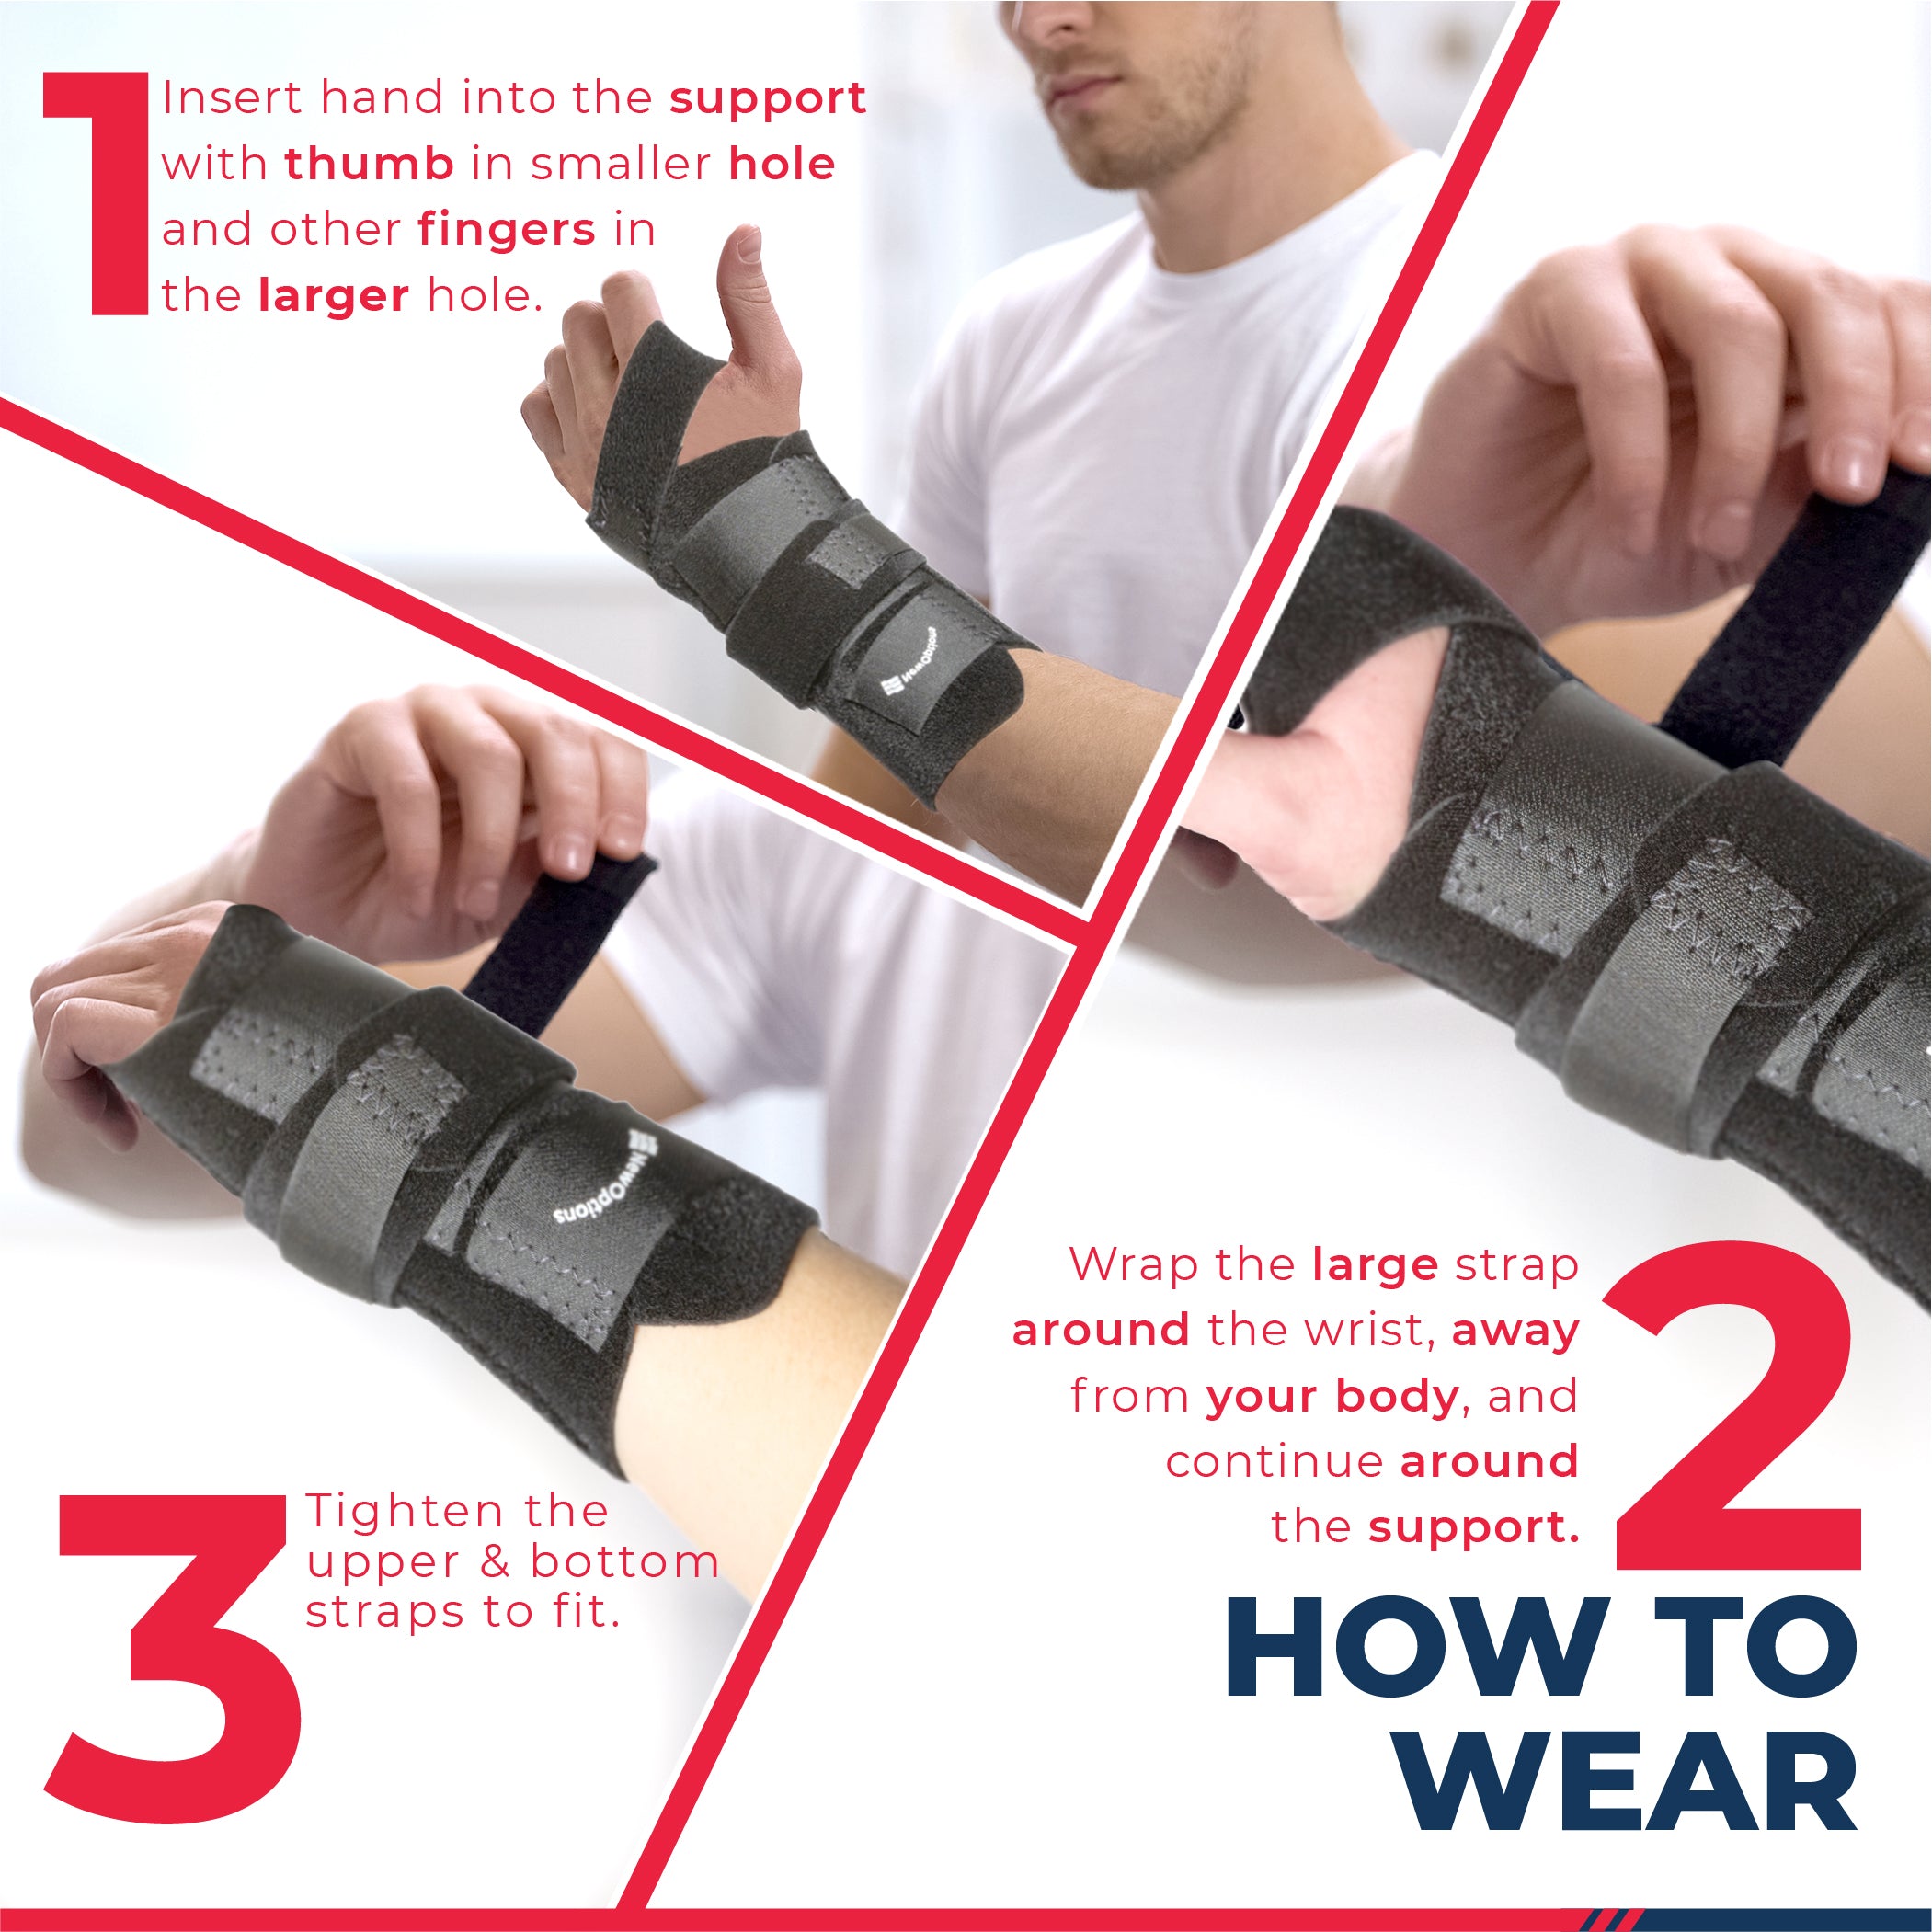 wrist compression support Archives - Orthotix